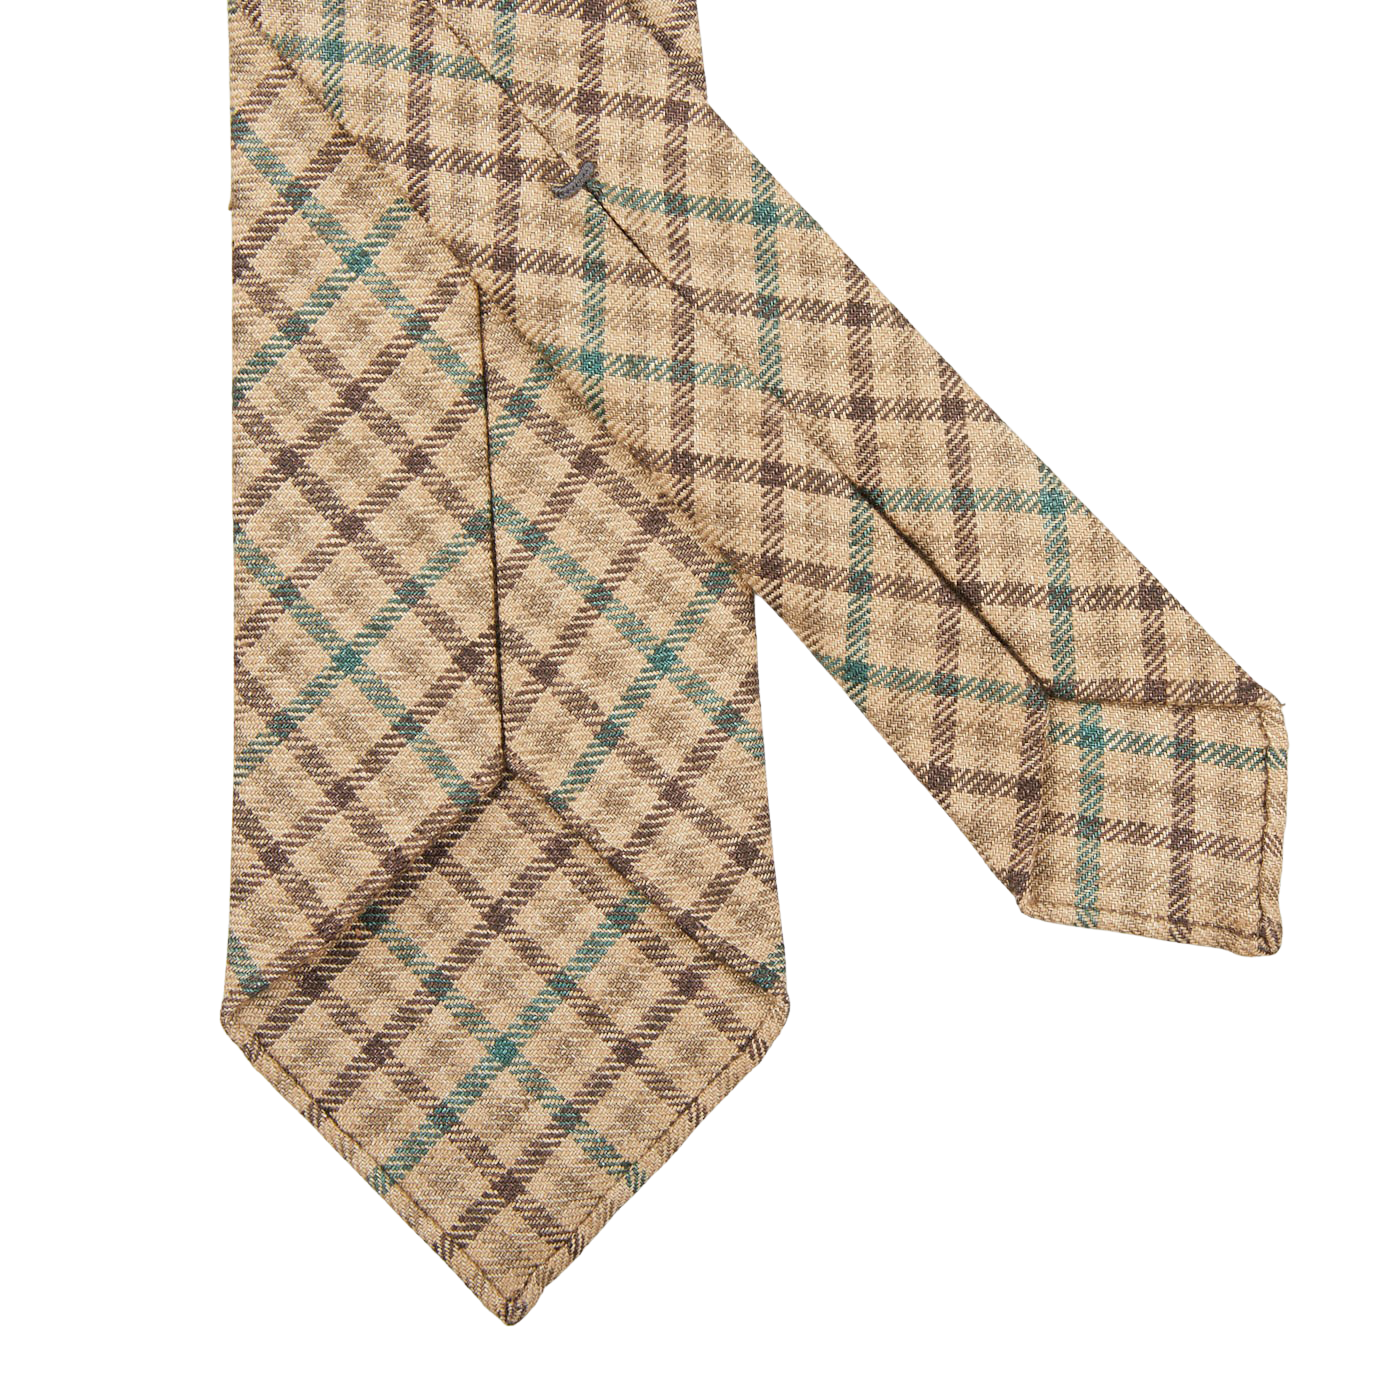 Dreaming of Monday Brown Green Gunclub 7-Fold French Linen Tie Back